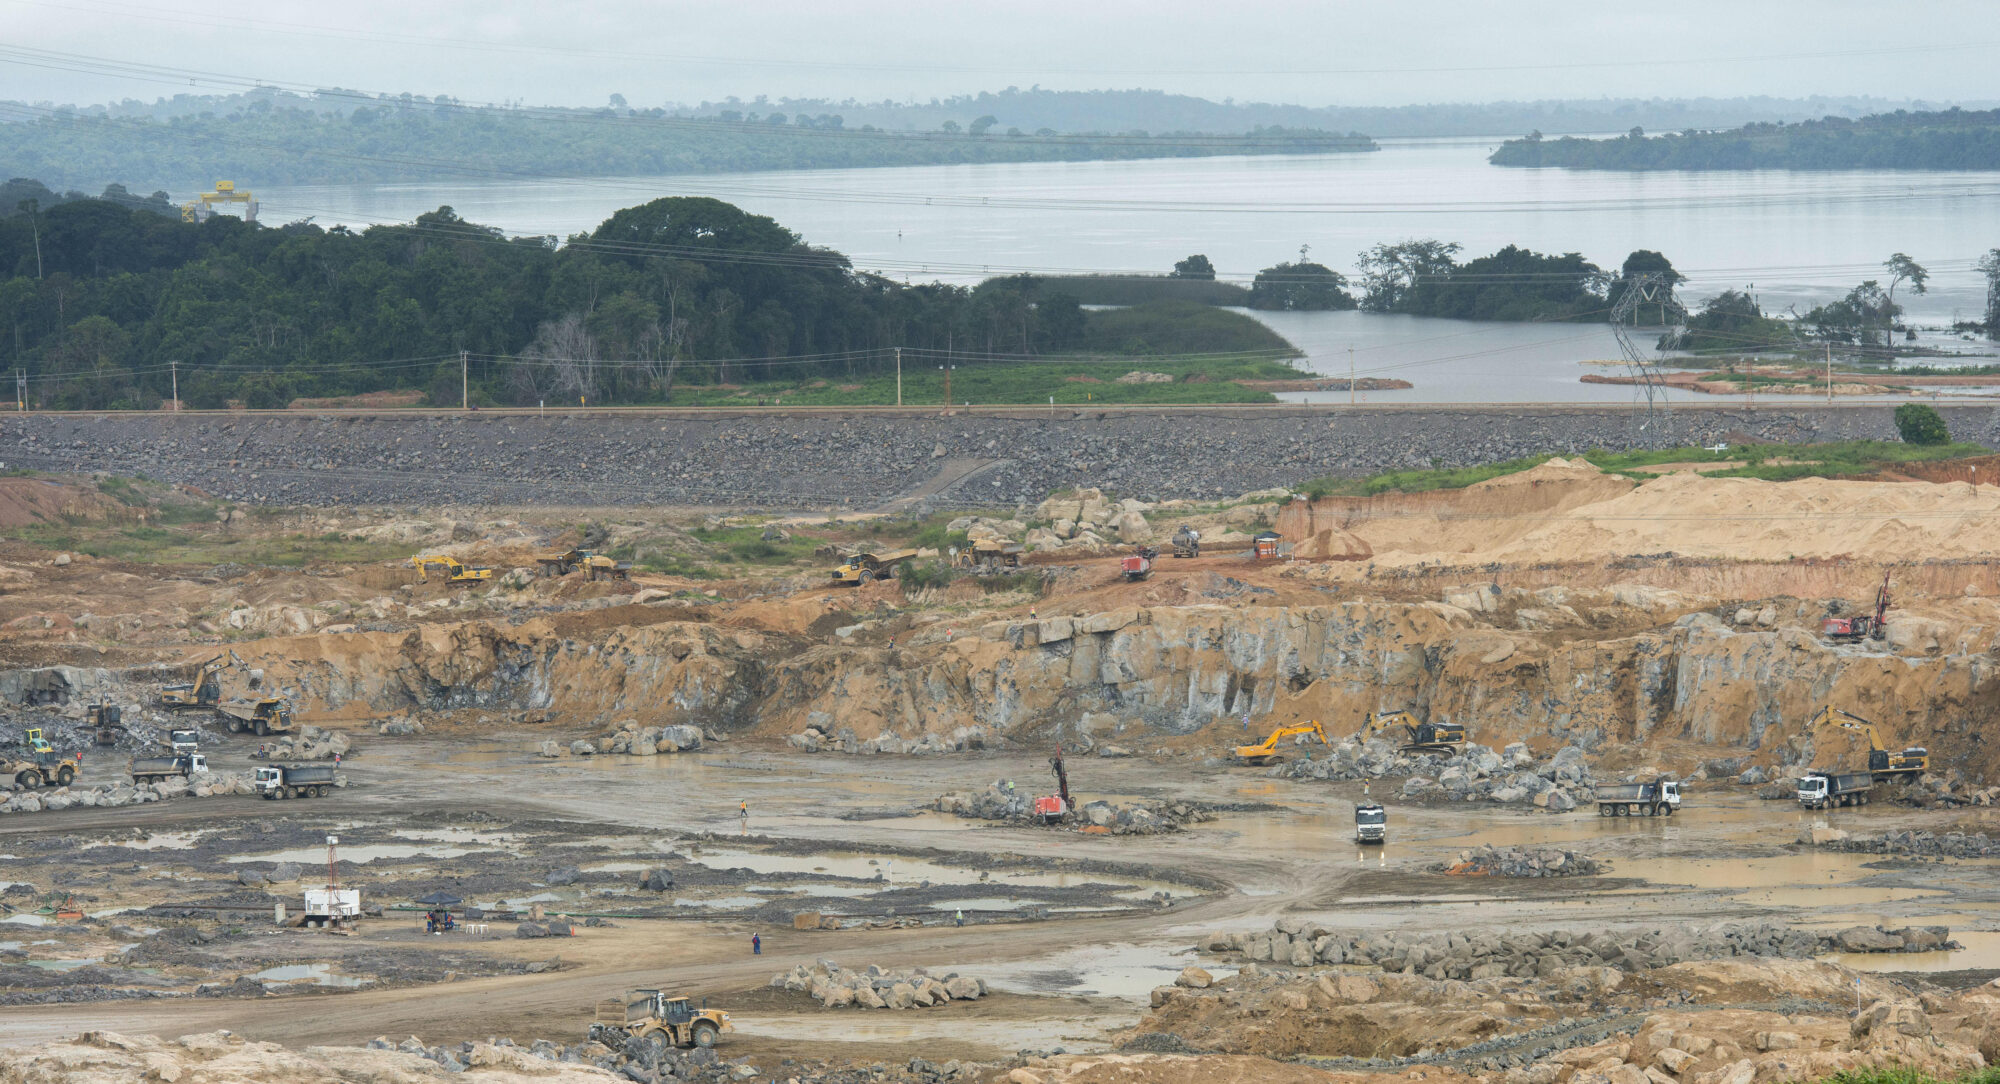 Construction of the Belo Monte hydroelectric power plant